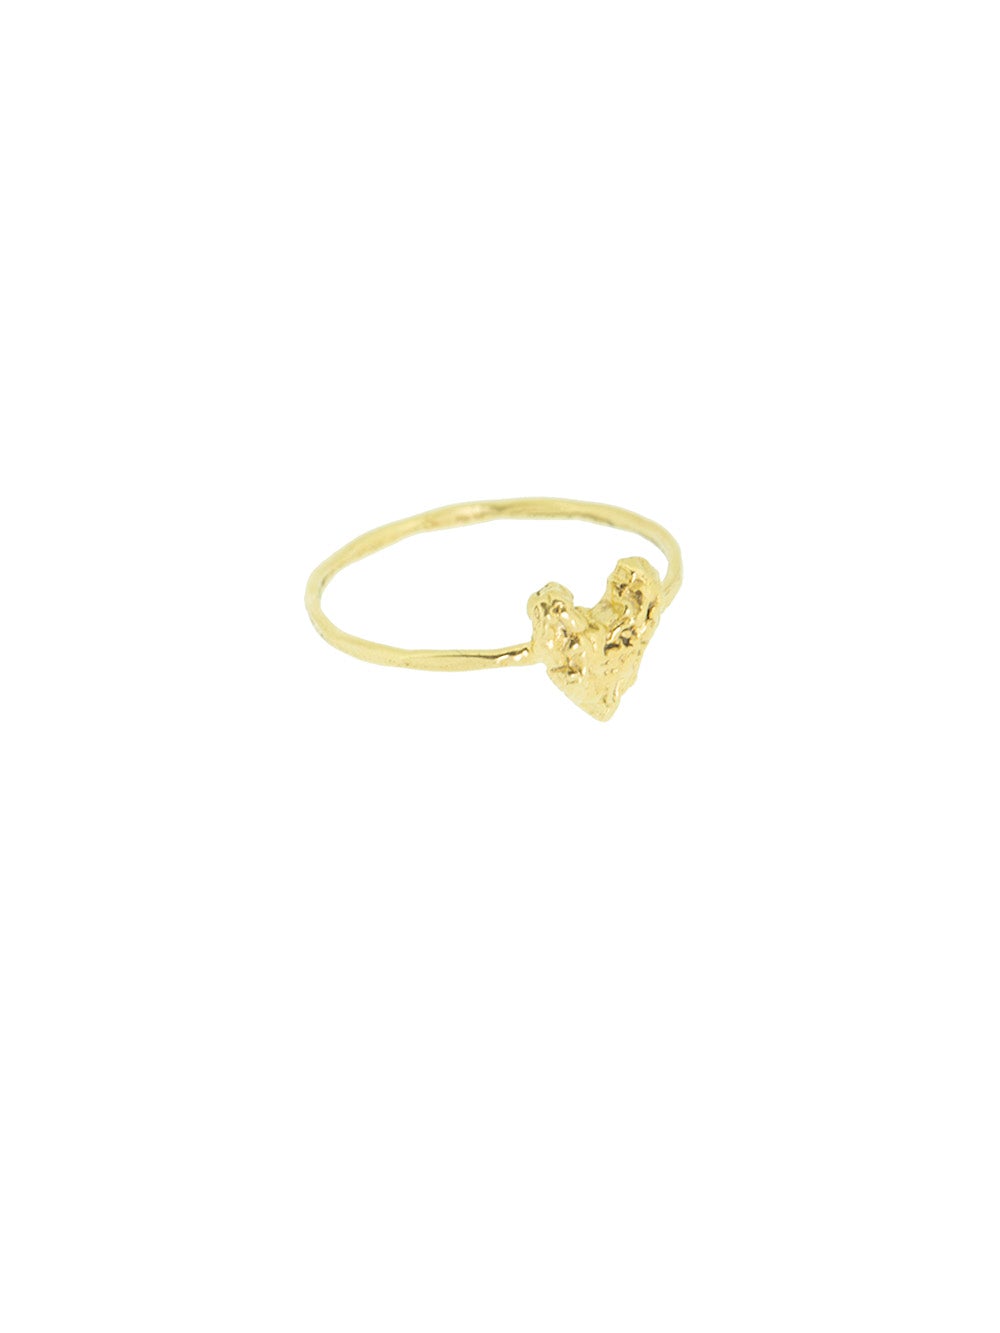 MEDICINE ring⎜Goldplated